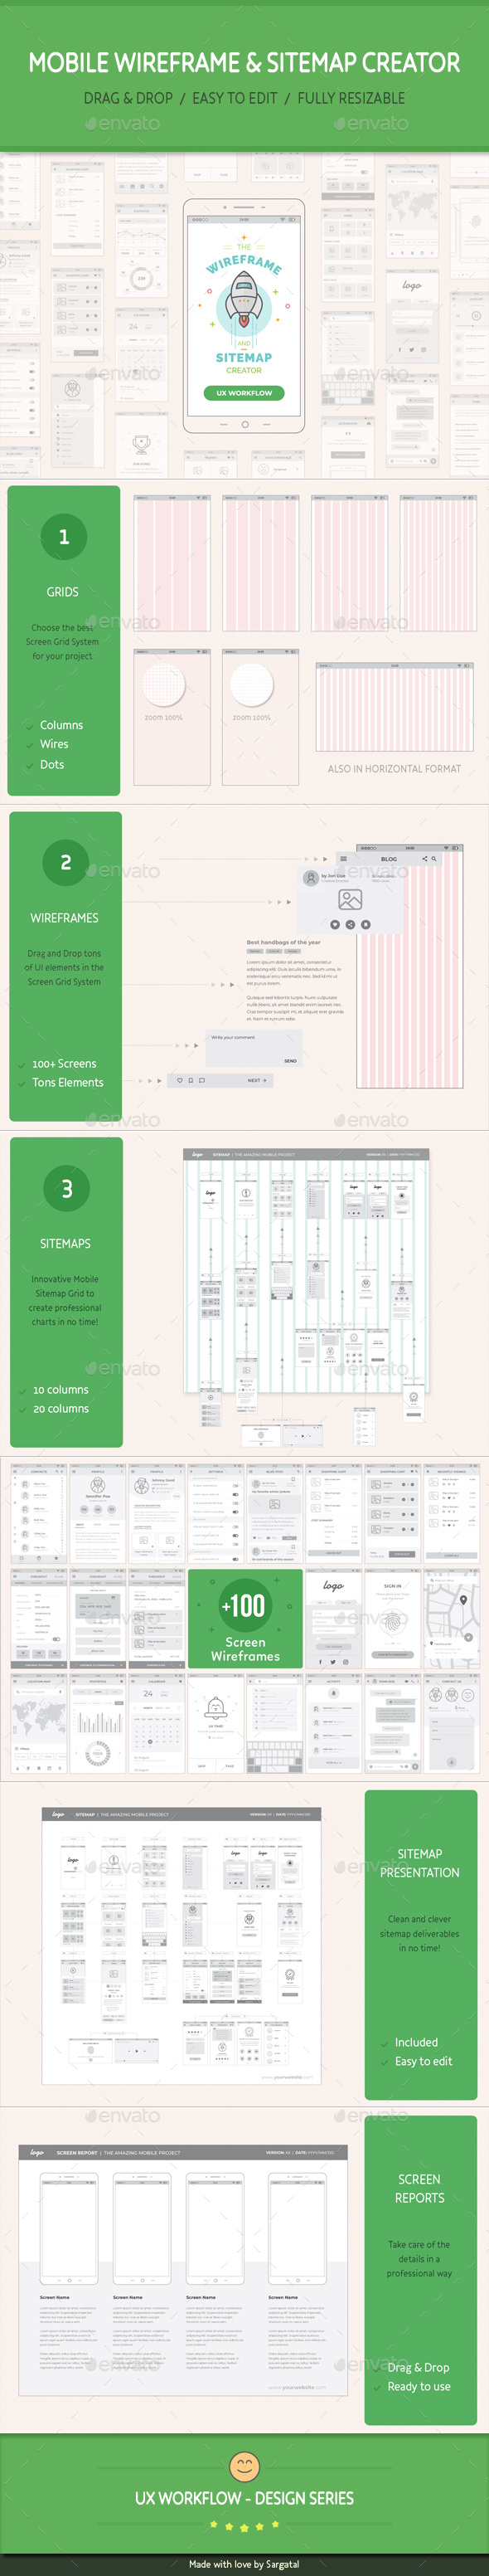 UX Workflow - Mobile Wireframe and Sitemap Creator